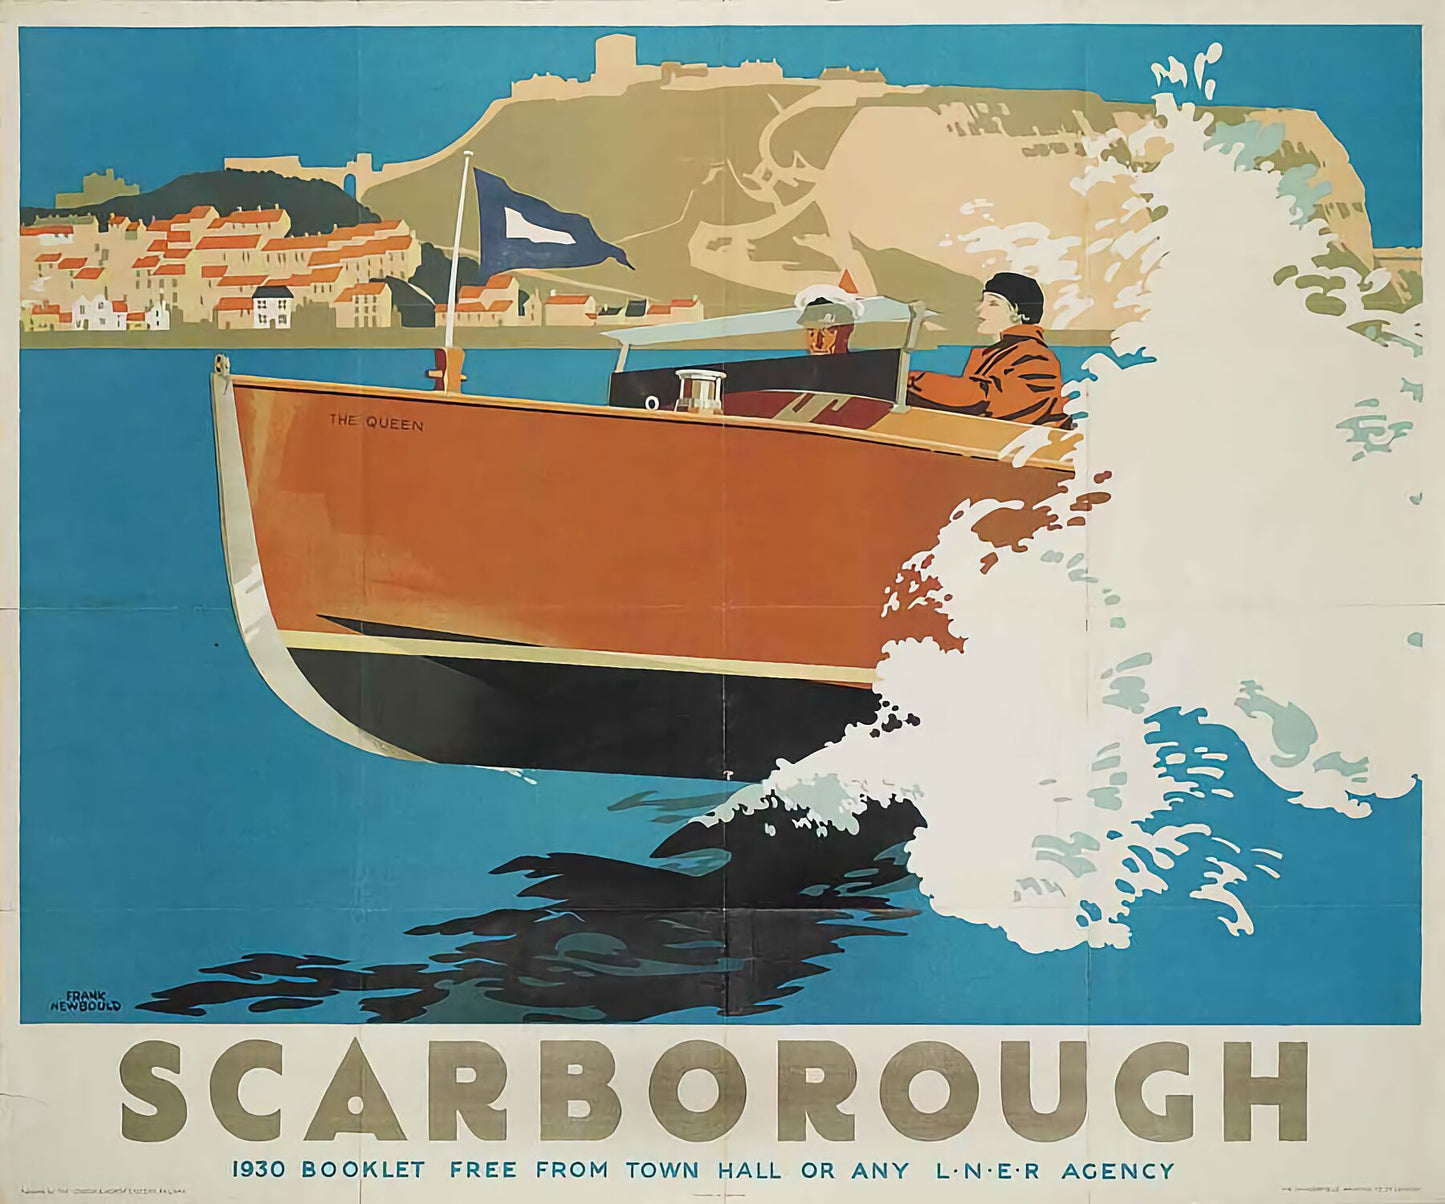 Scarborough by Frank Newbould - 1930